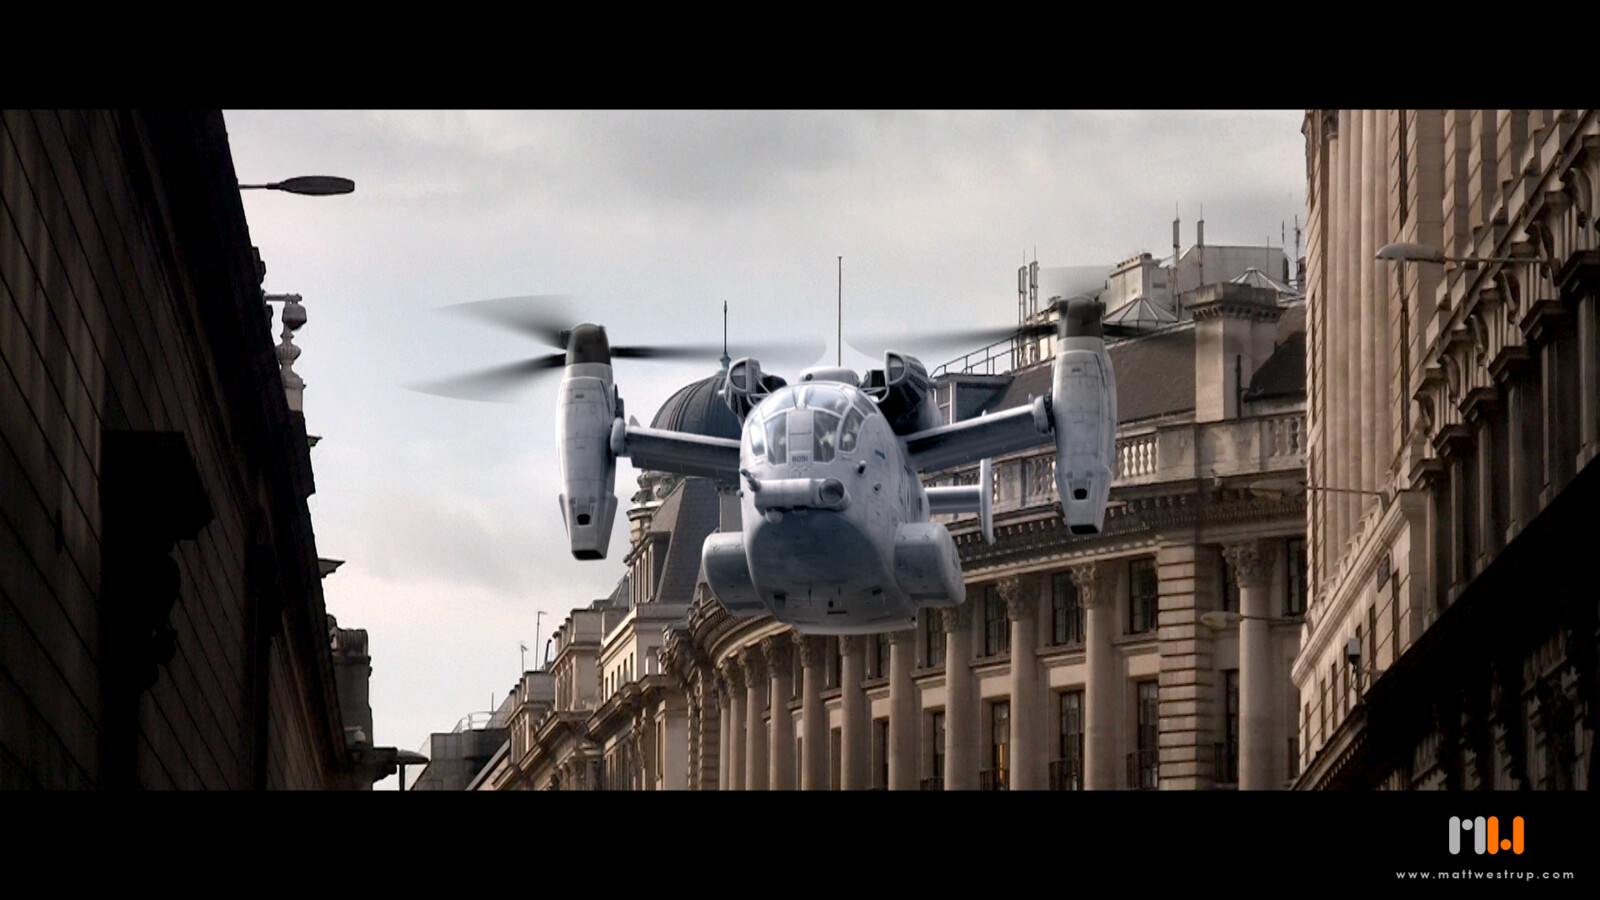 Troop Carrier - Role: All VFX.